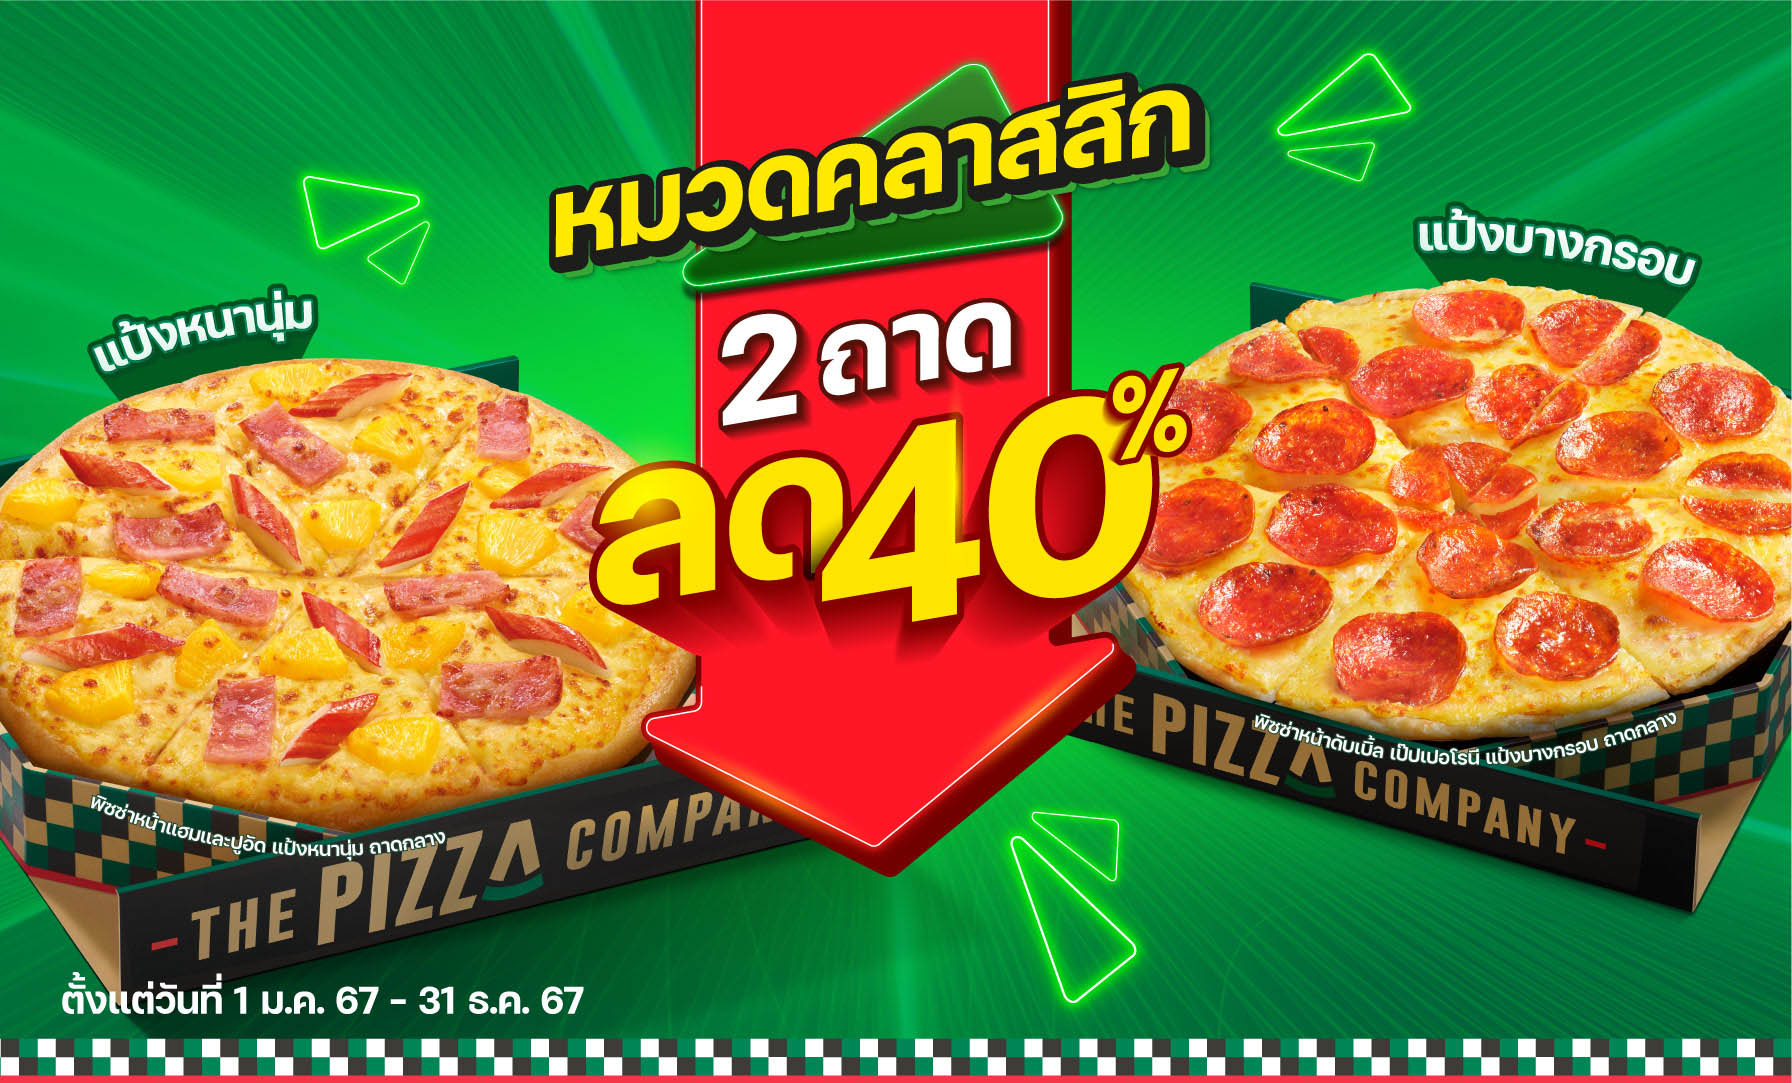 2 Pizzas, Get 40% Discount for Classic Topping